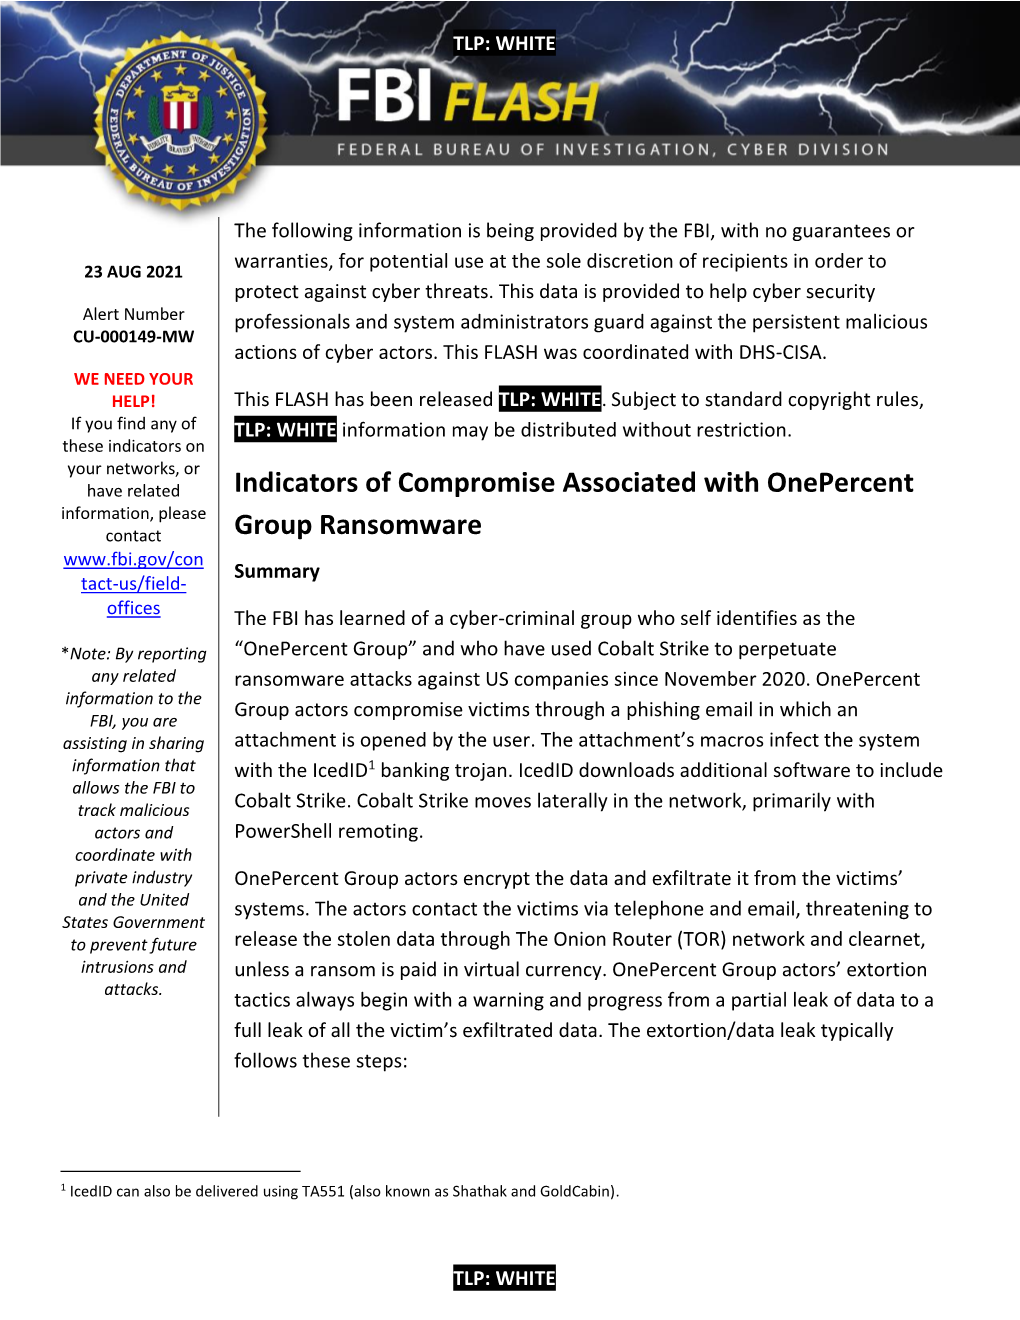 Indicators of Compromise Associated with Onepercent Group Ransomware